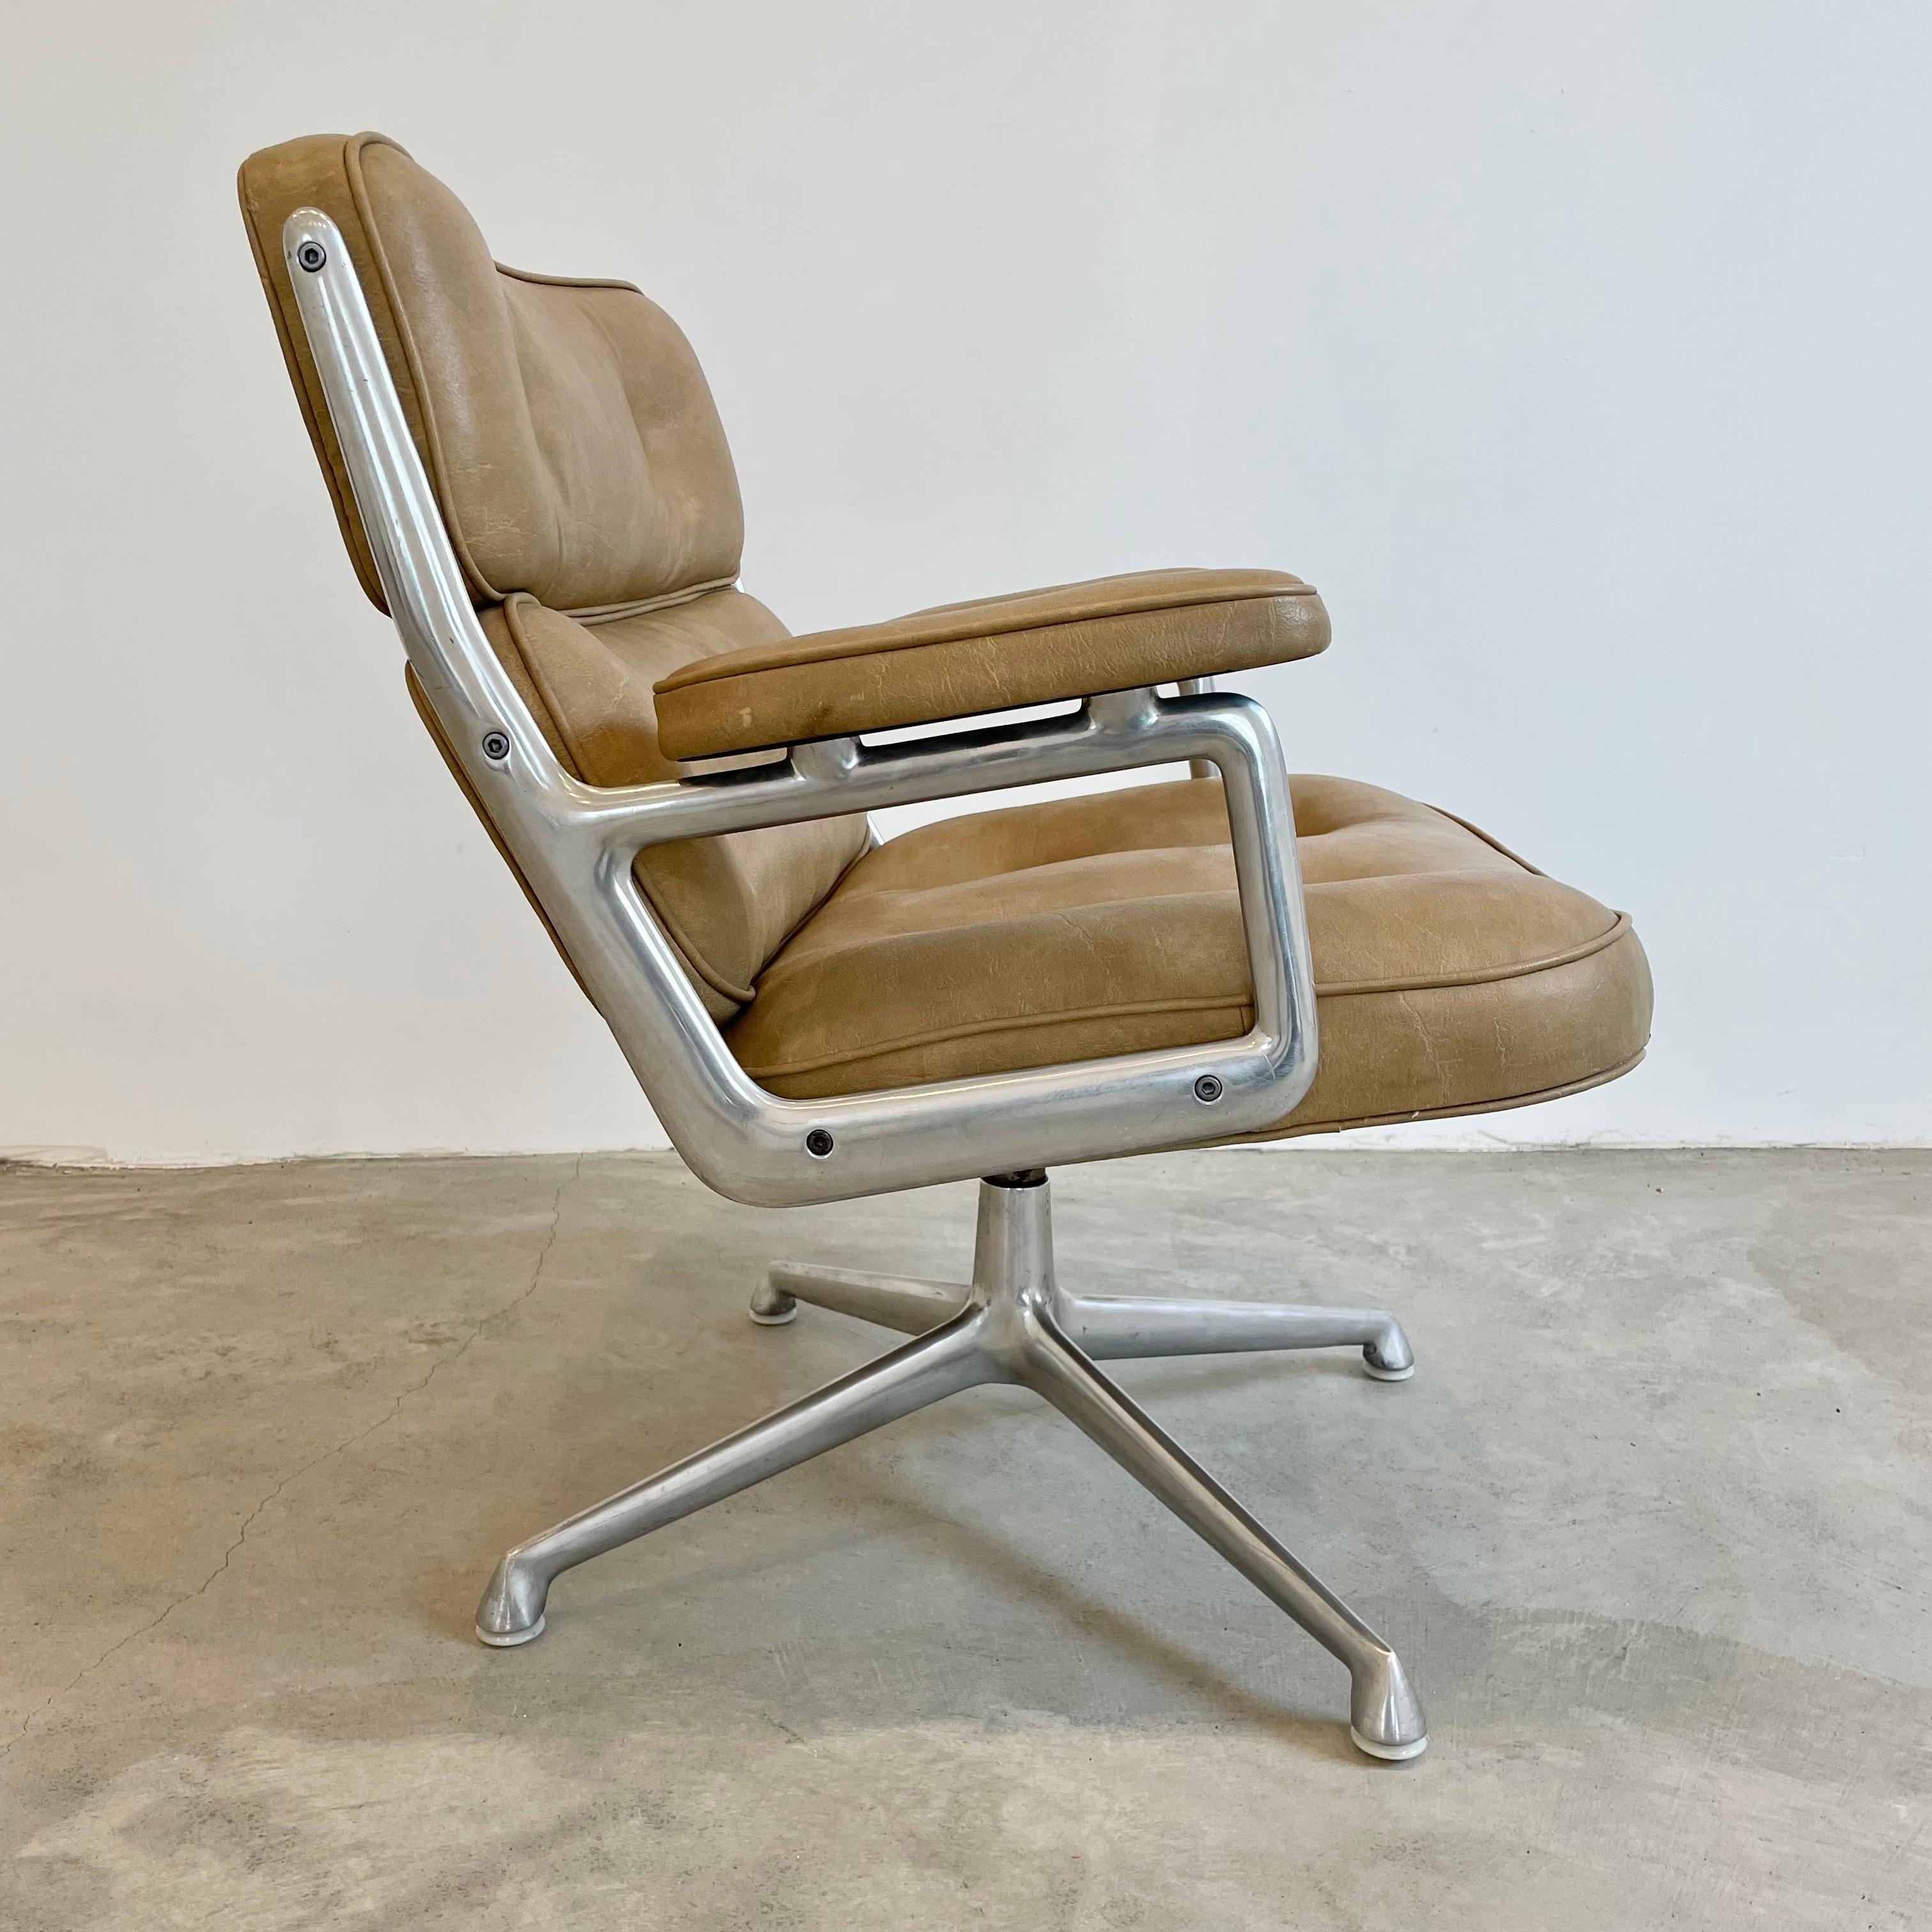 Synthetic Vintage Eames Time Life Lobby Chair in Camel